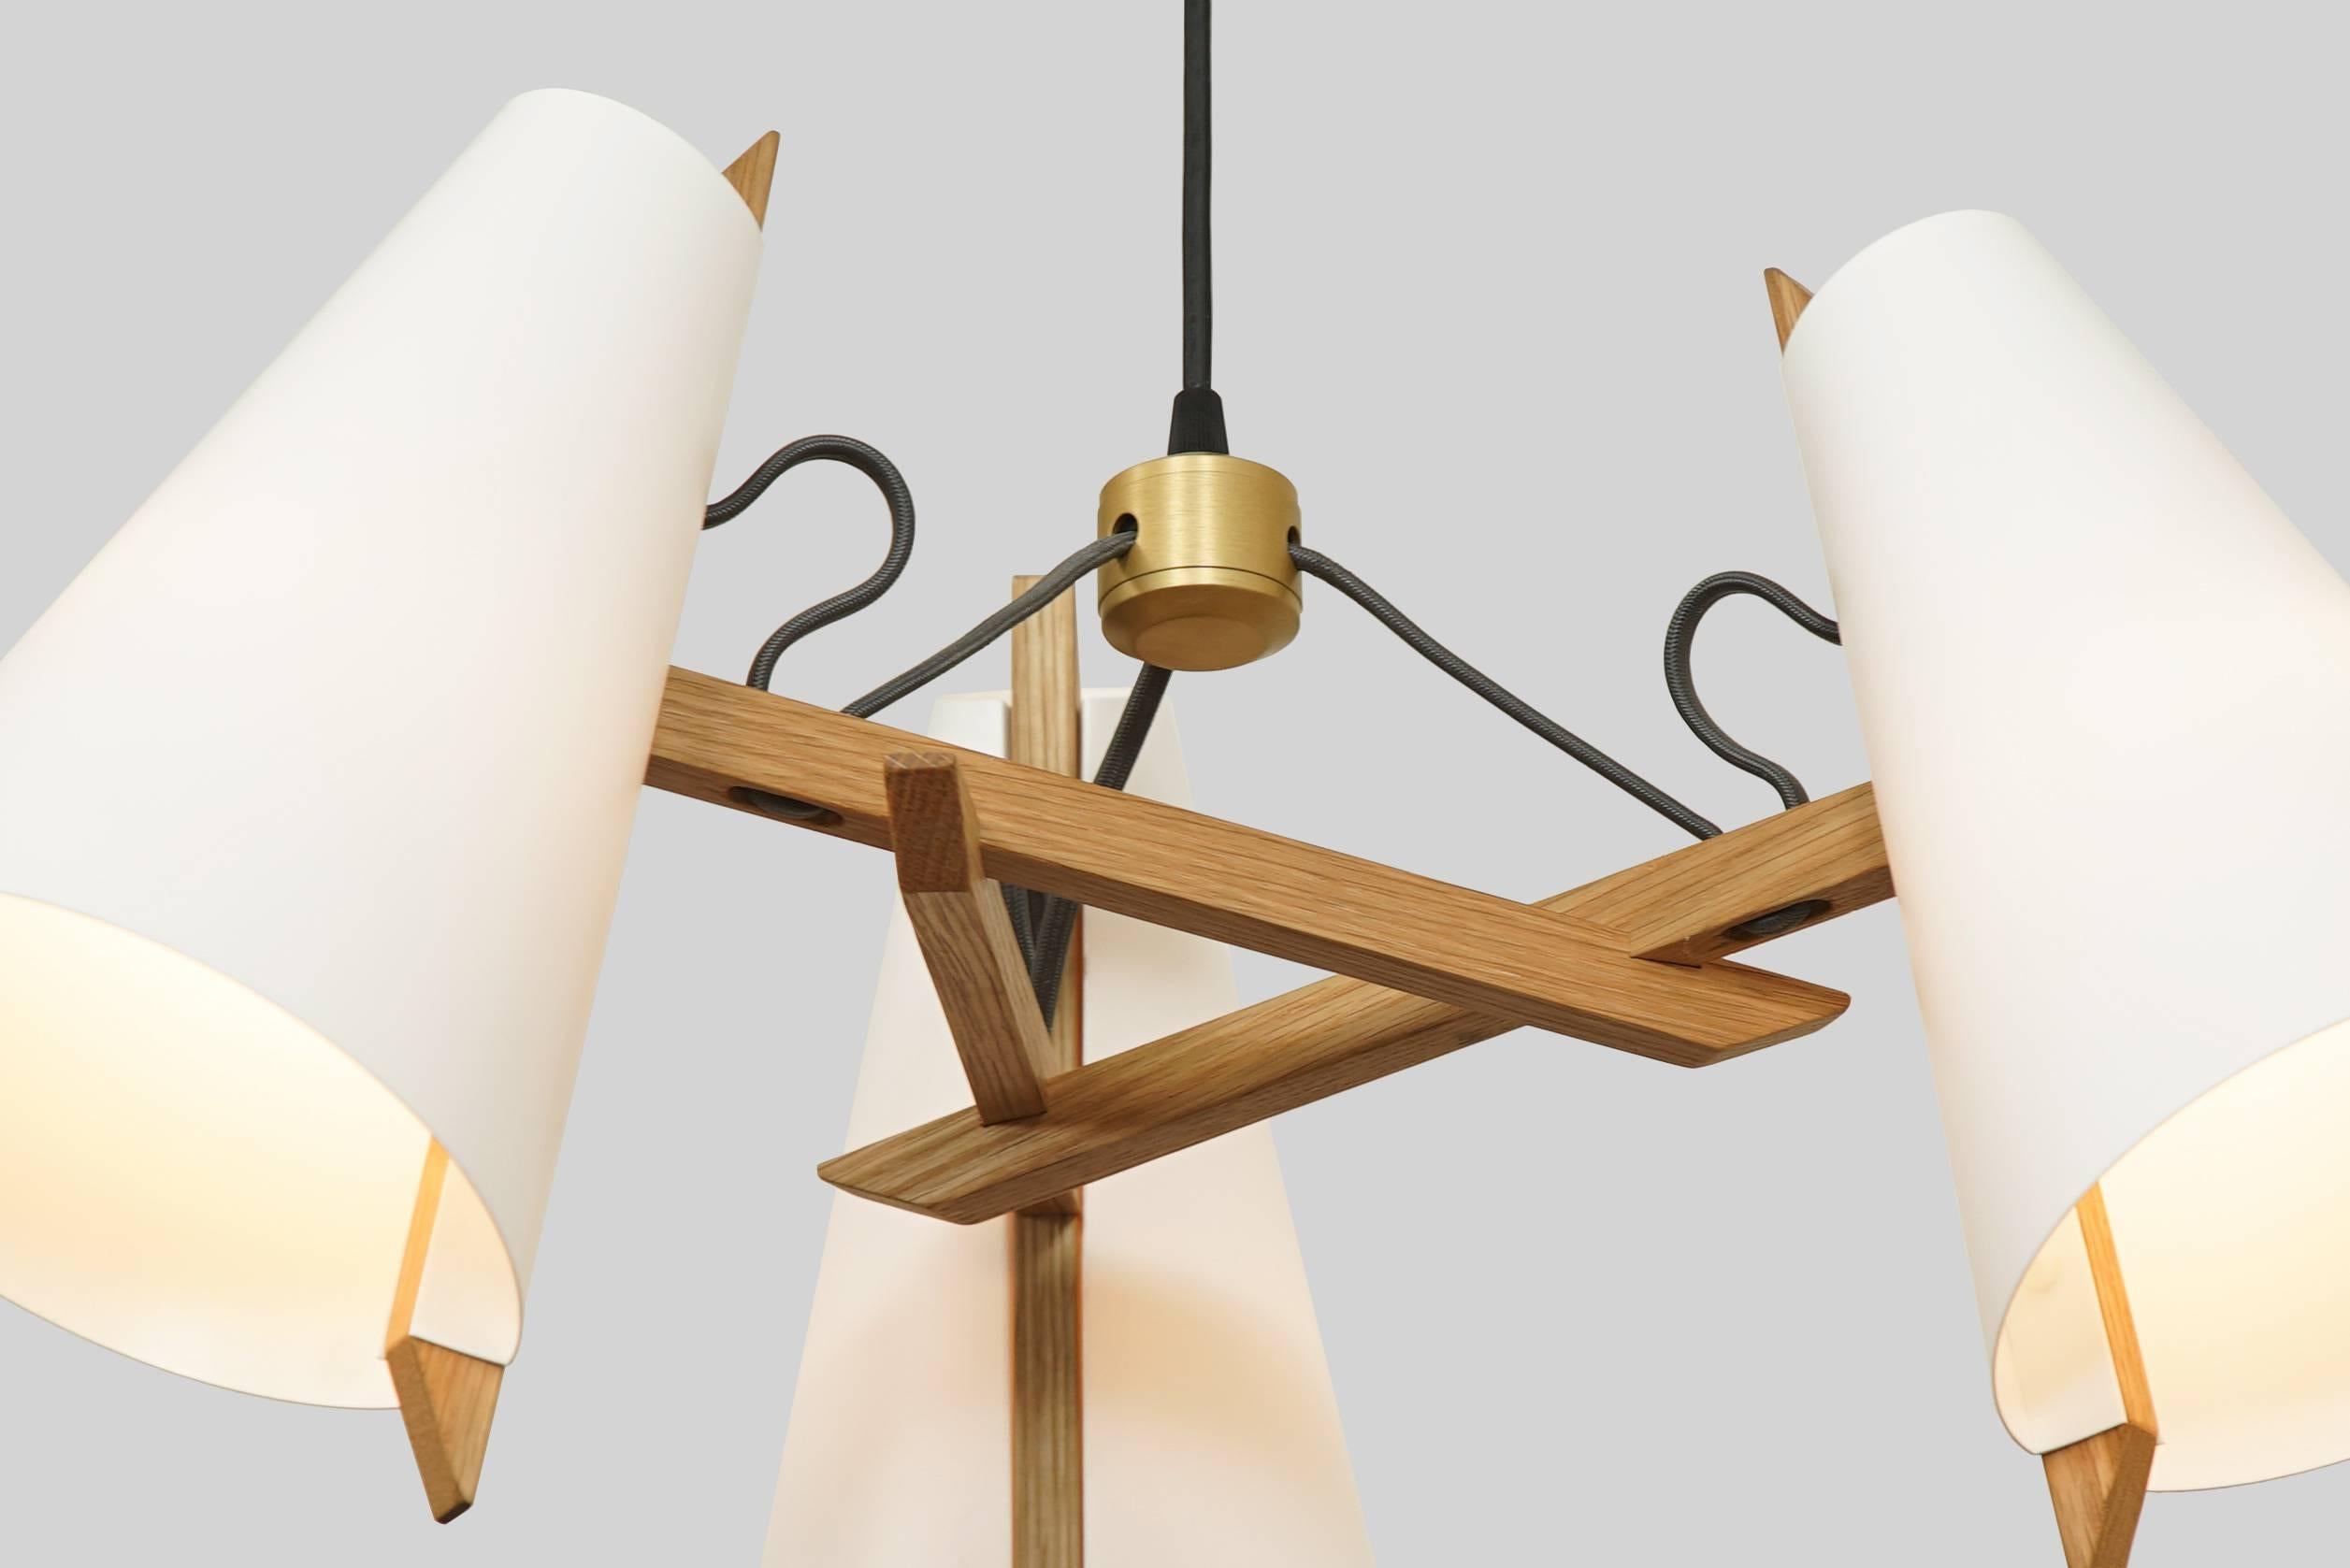 The Hood Family is inspired by wooden sailboats and the work of Aino Aalto. Thin sheets of polyethylene are die cut and bent, joining narrow spines of white oak to create the hooded shade. The complex joinery of the Pendant and Chandelier results in